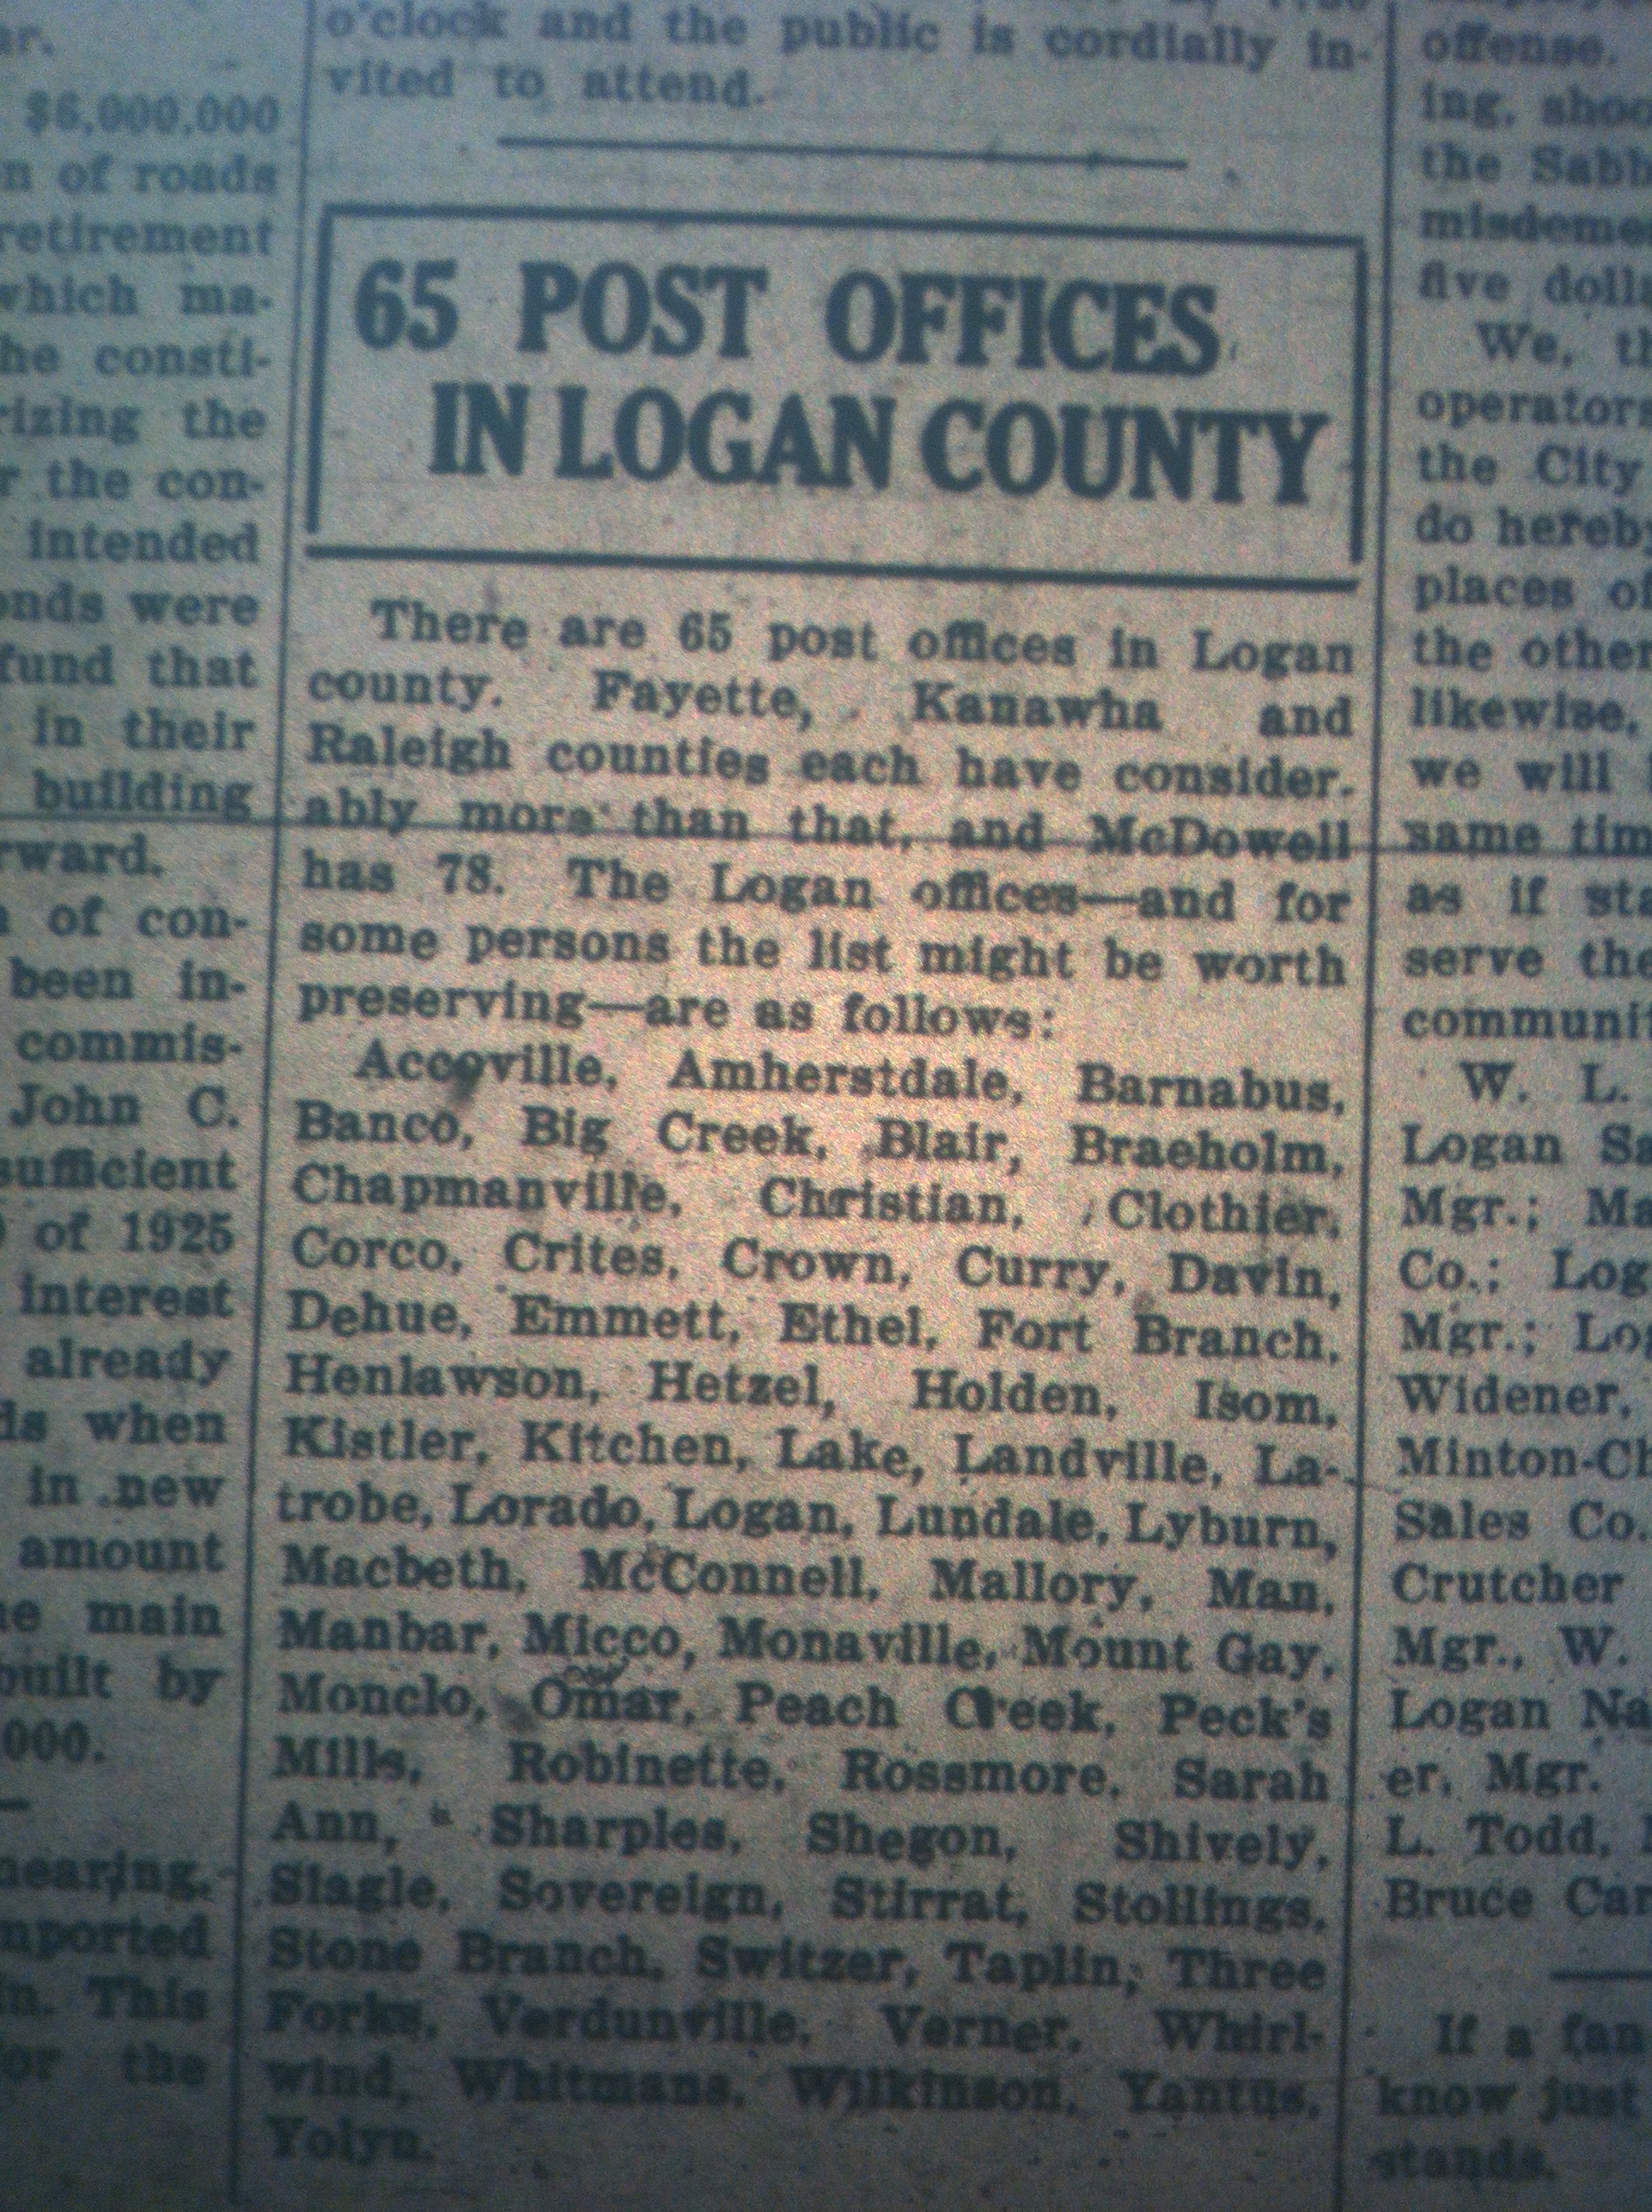 65 Post Offices in Logan County LB 09.24.1926.JPG